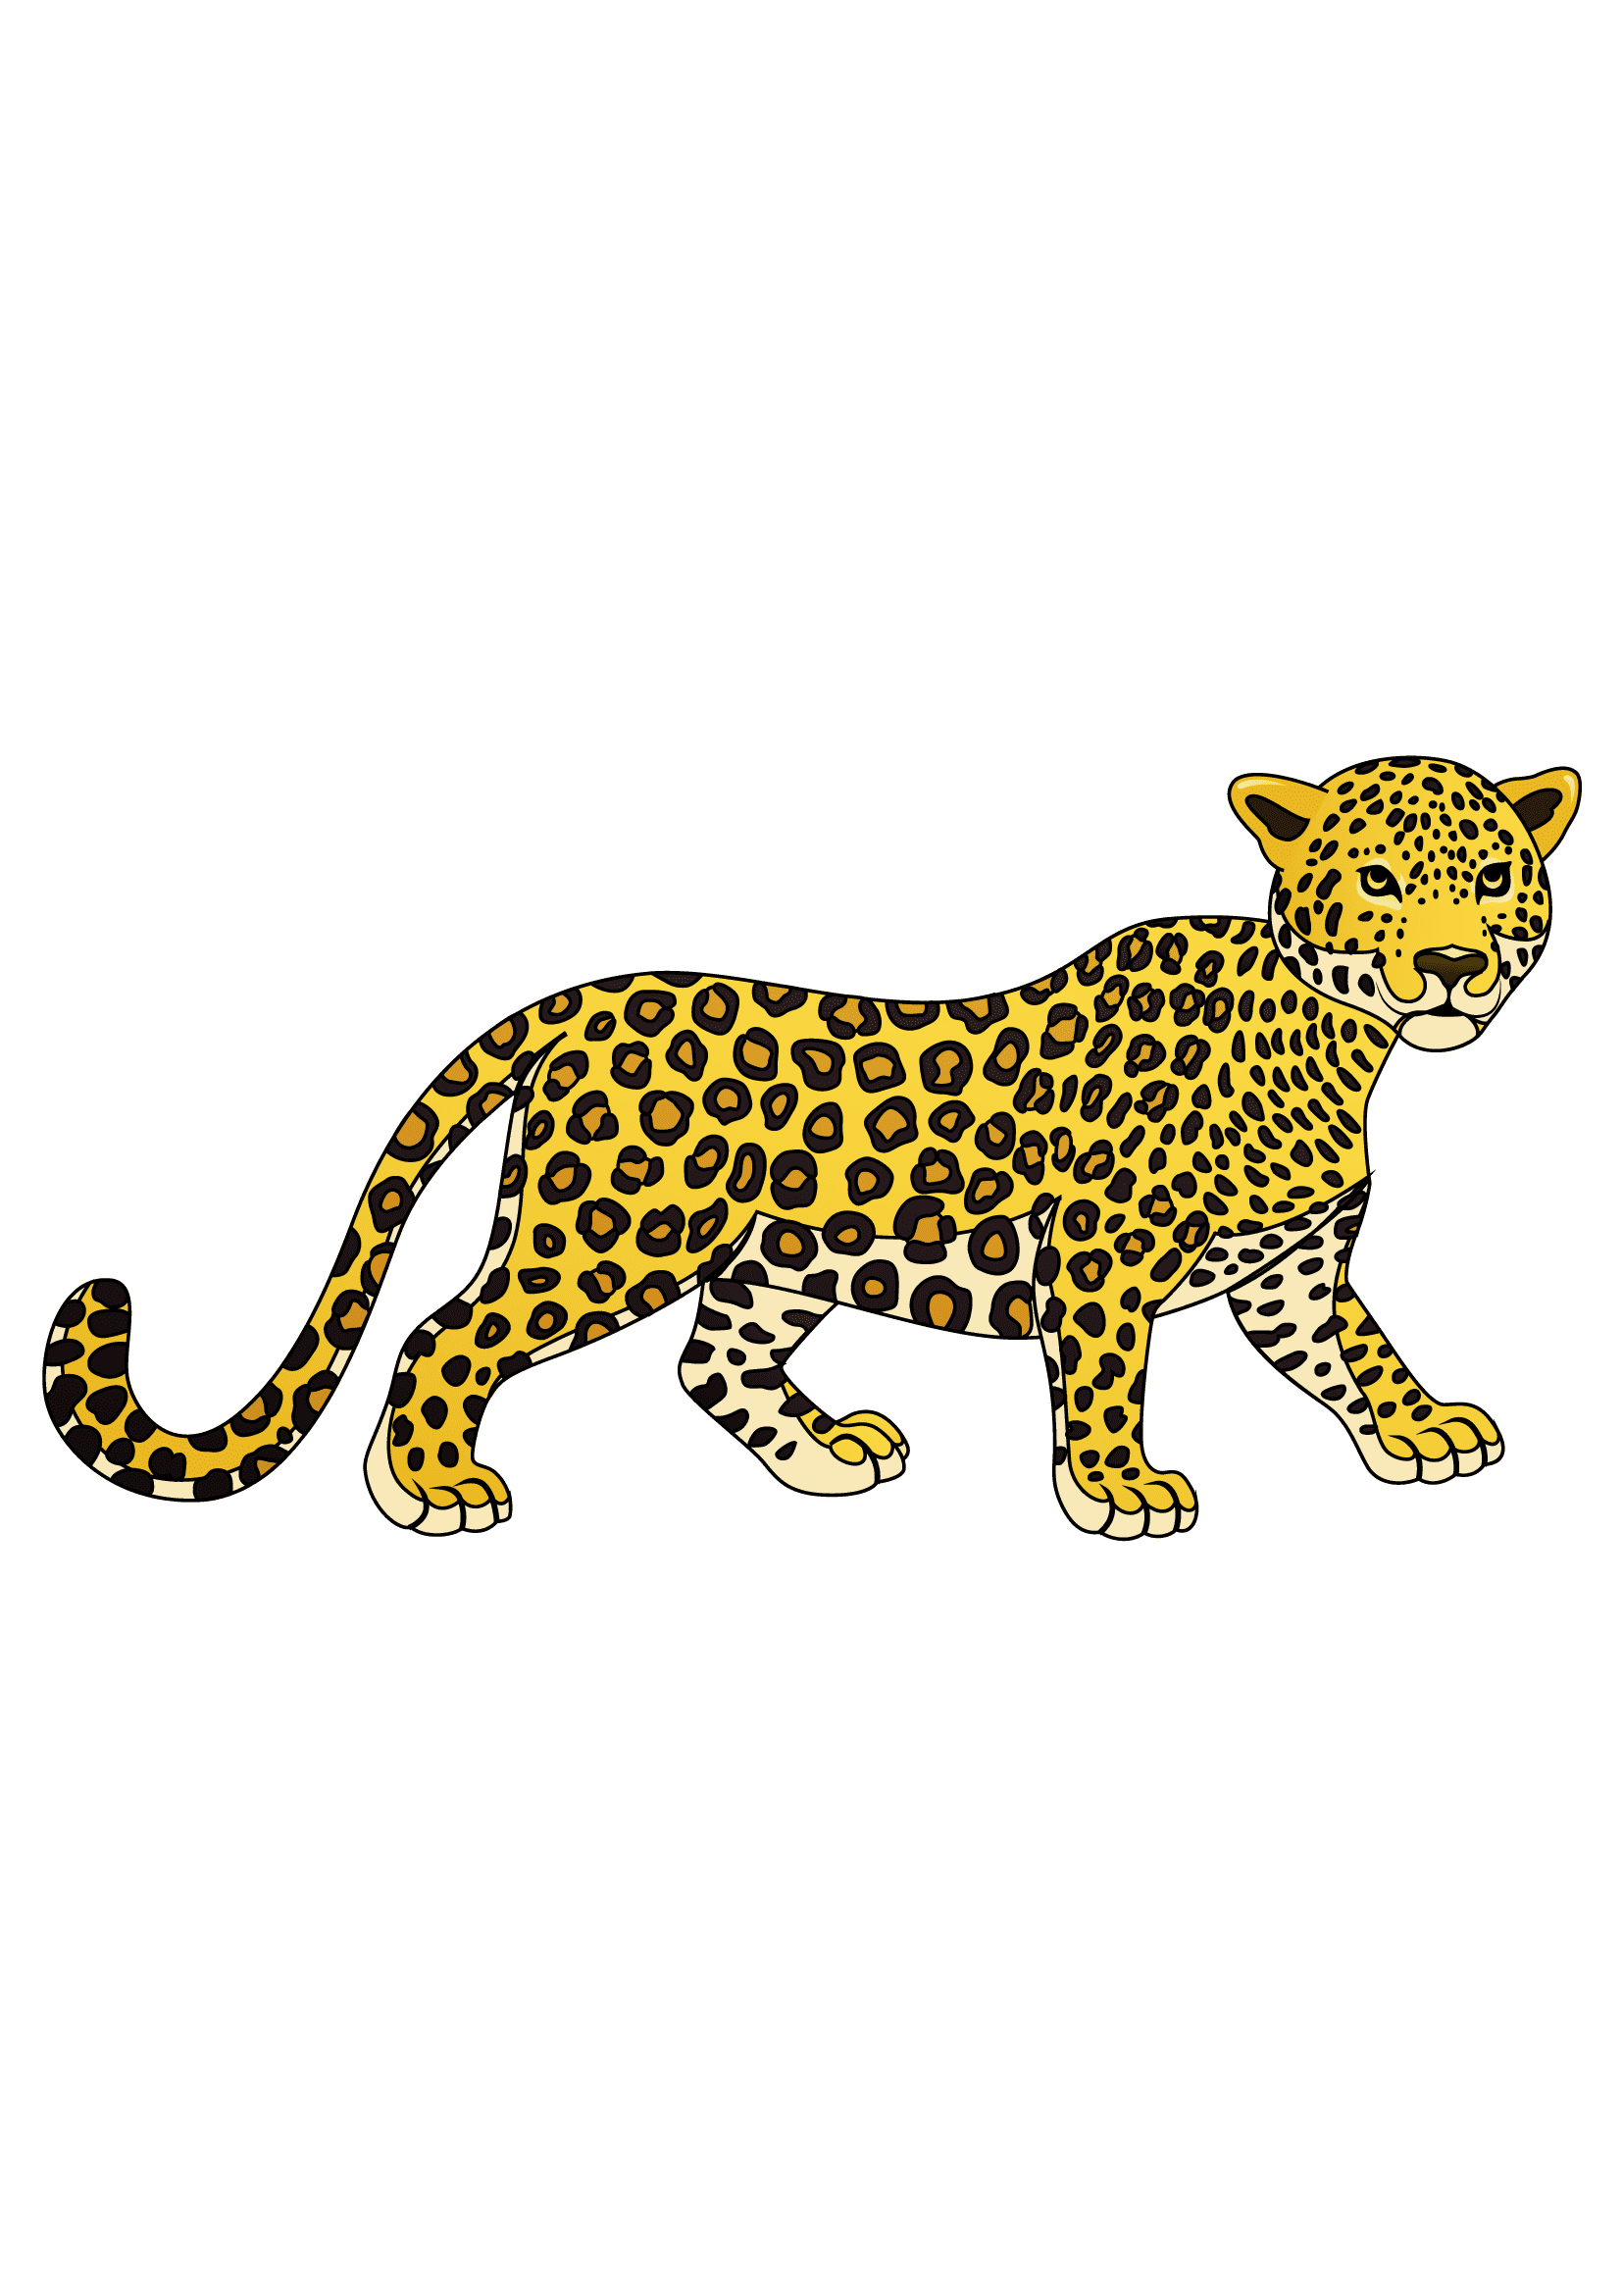 How to Draw A Leopard Step by Step Printable